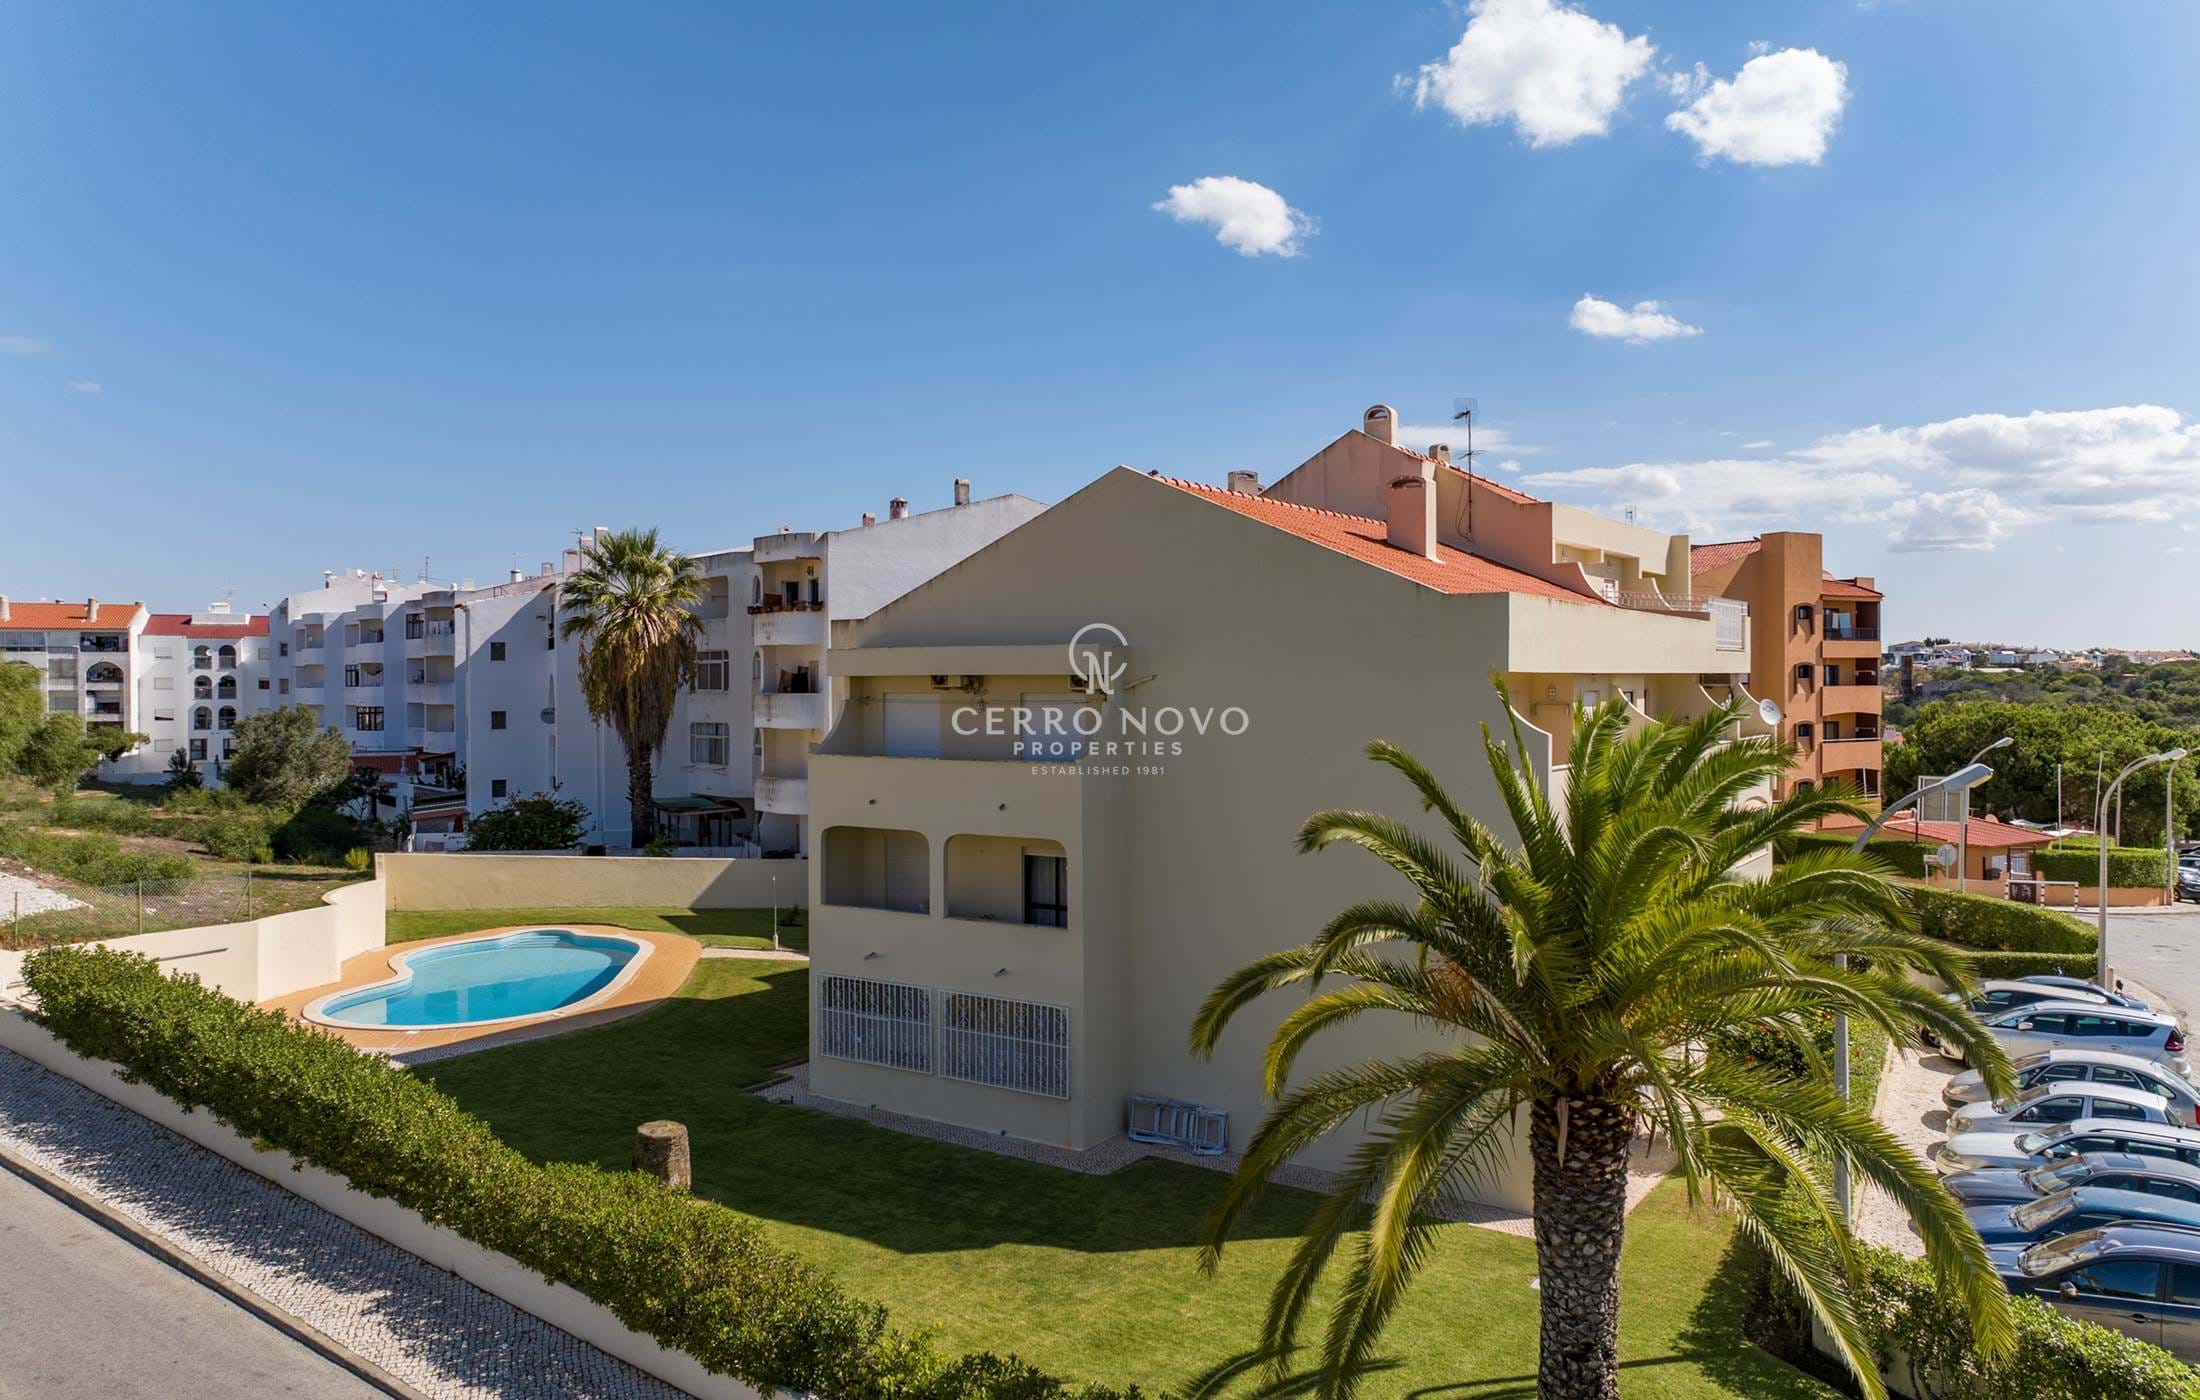  Excellent Apartment in central Albufeira with pool, gardens, and two balconies